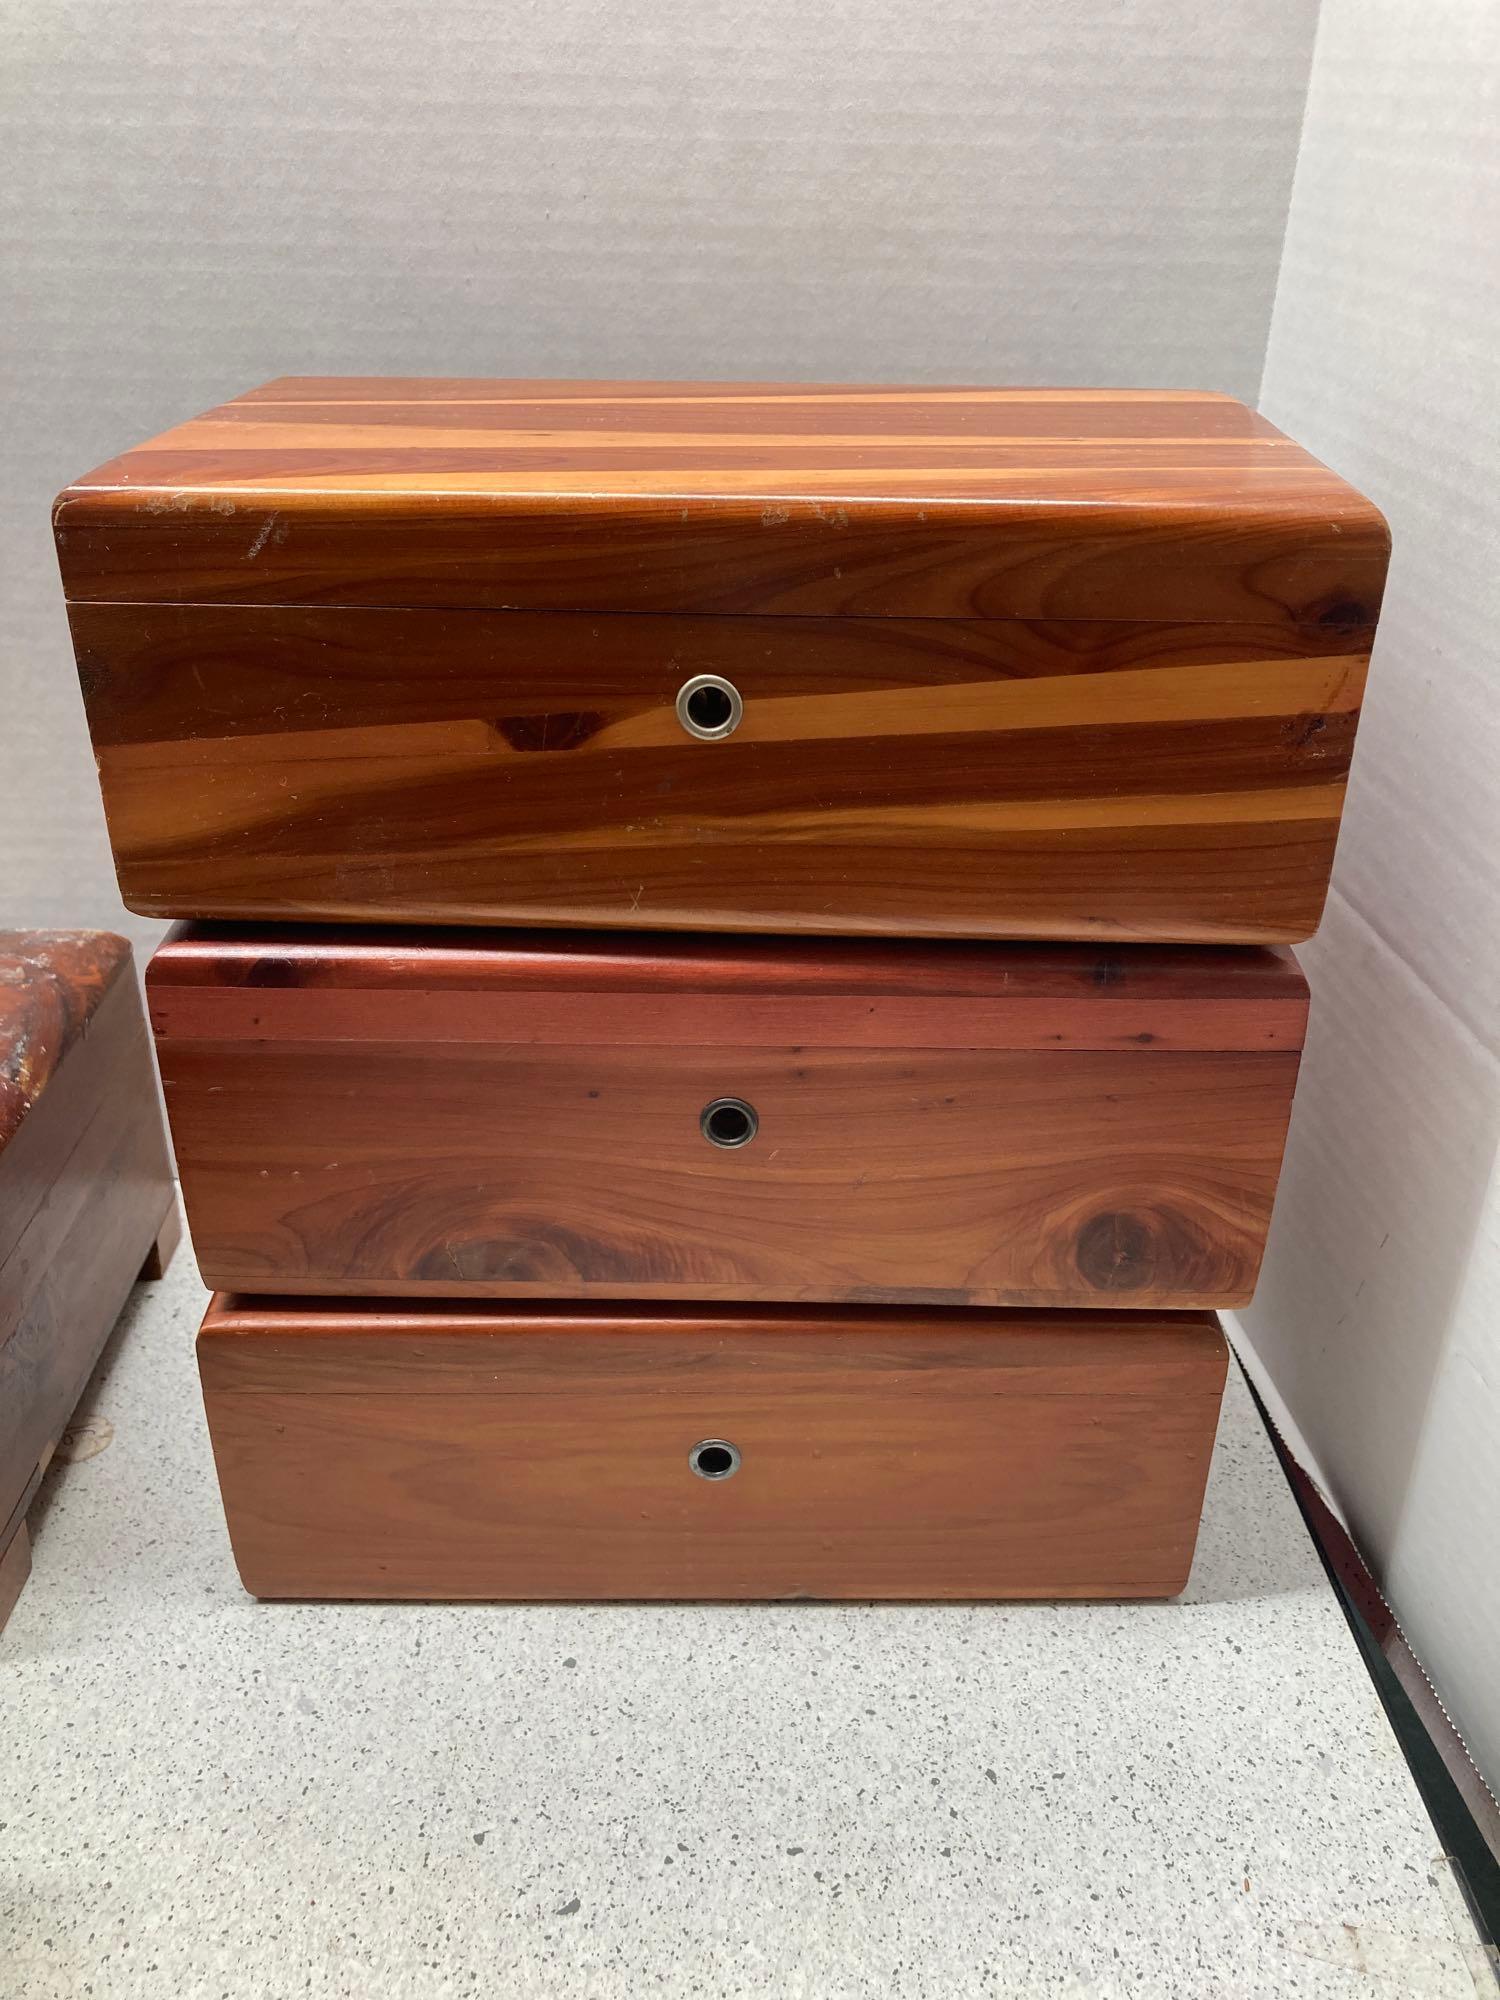 7 jewelry boxes, 6 wood and one Florentine